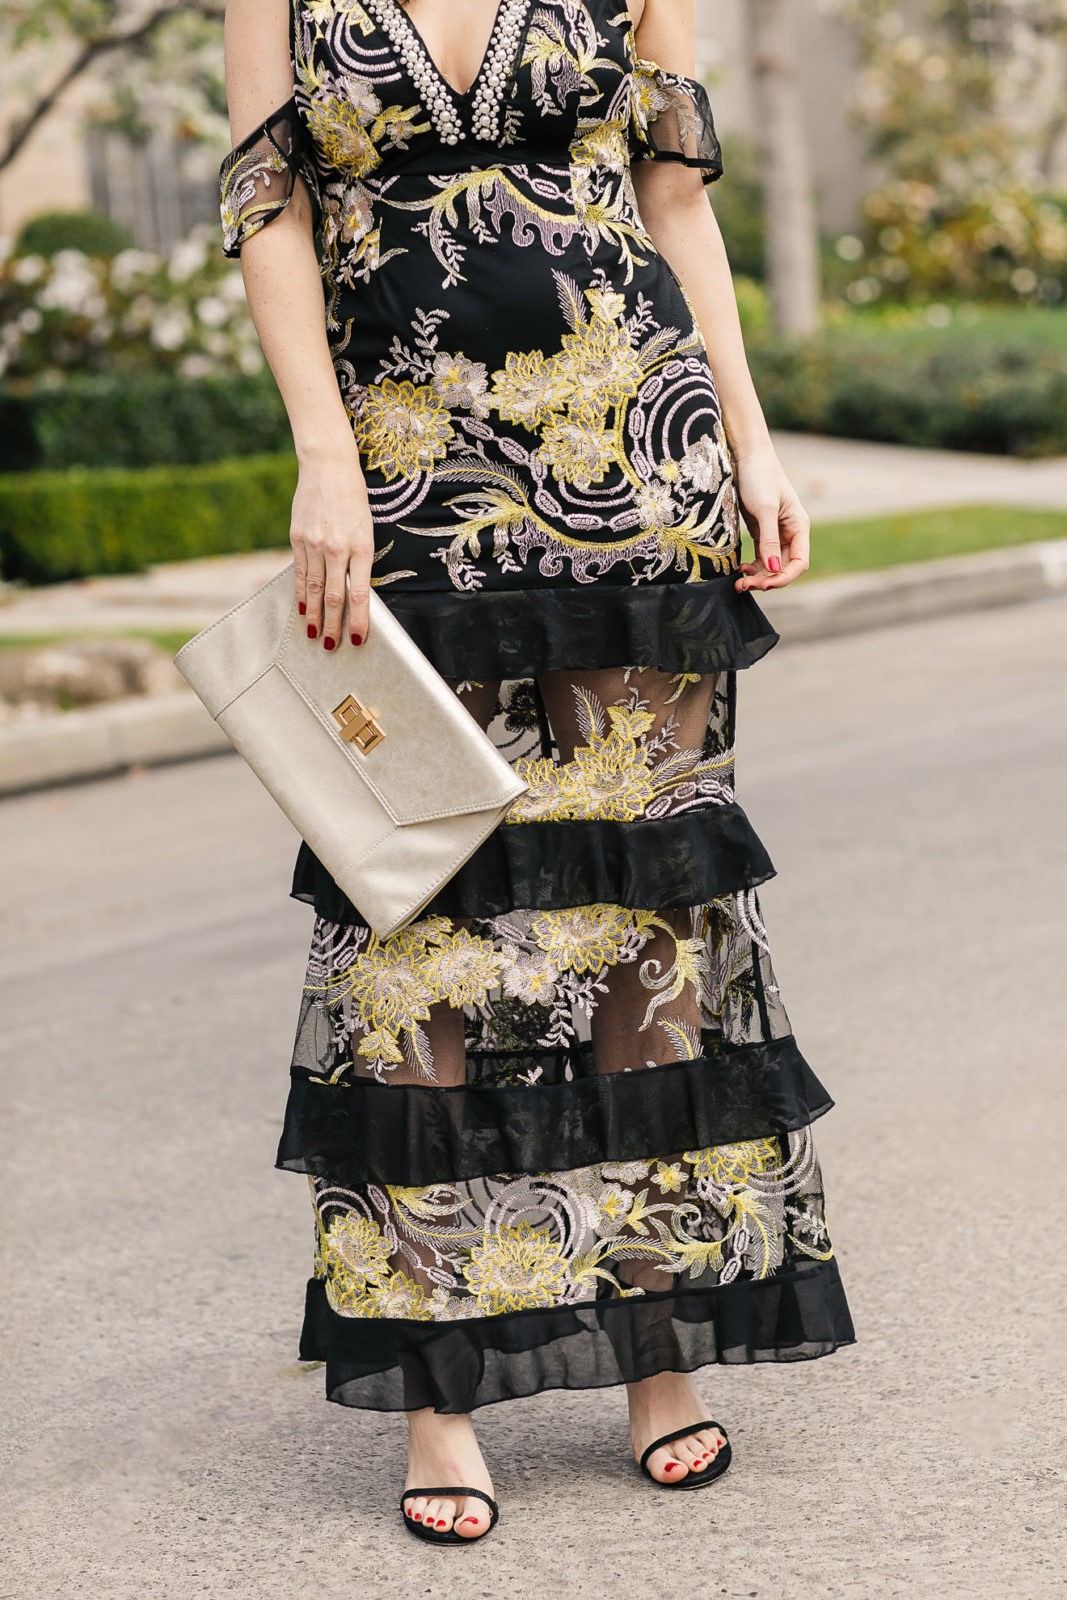 Spring Wedding Outfits featured by top US fashion blogger Laura Lily; Image of a woman wearing an Asos dress, Express clutch, Stuart Weitzman heels and Bauble Bar earrings.